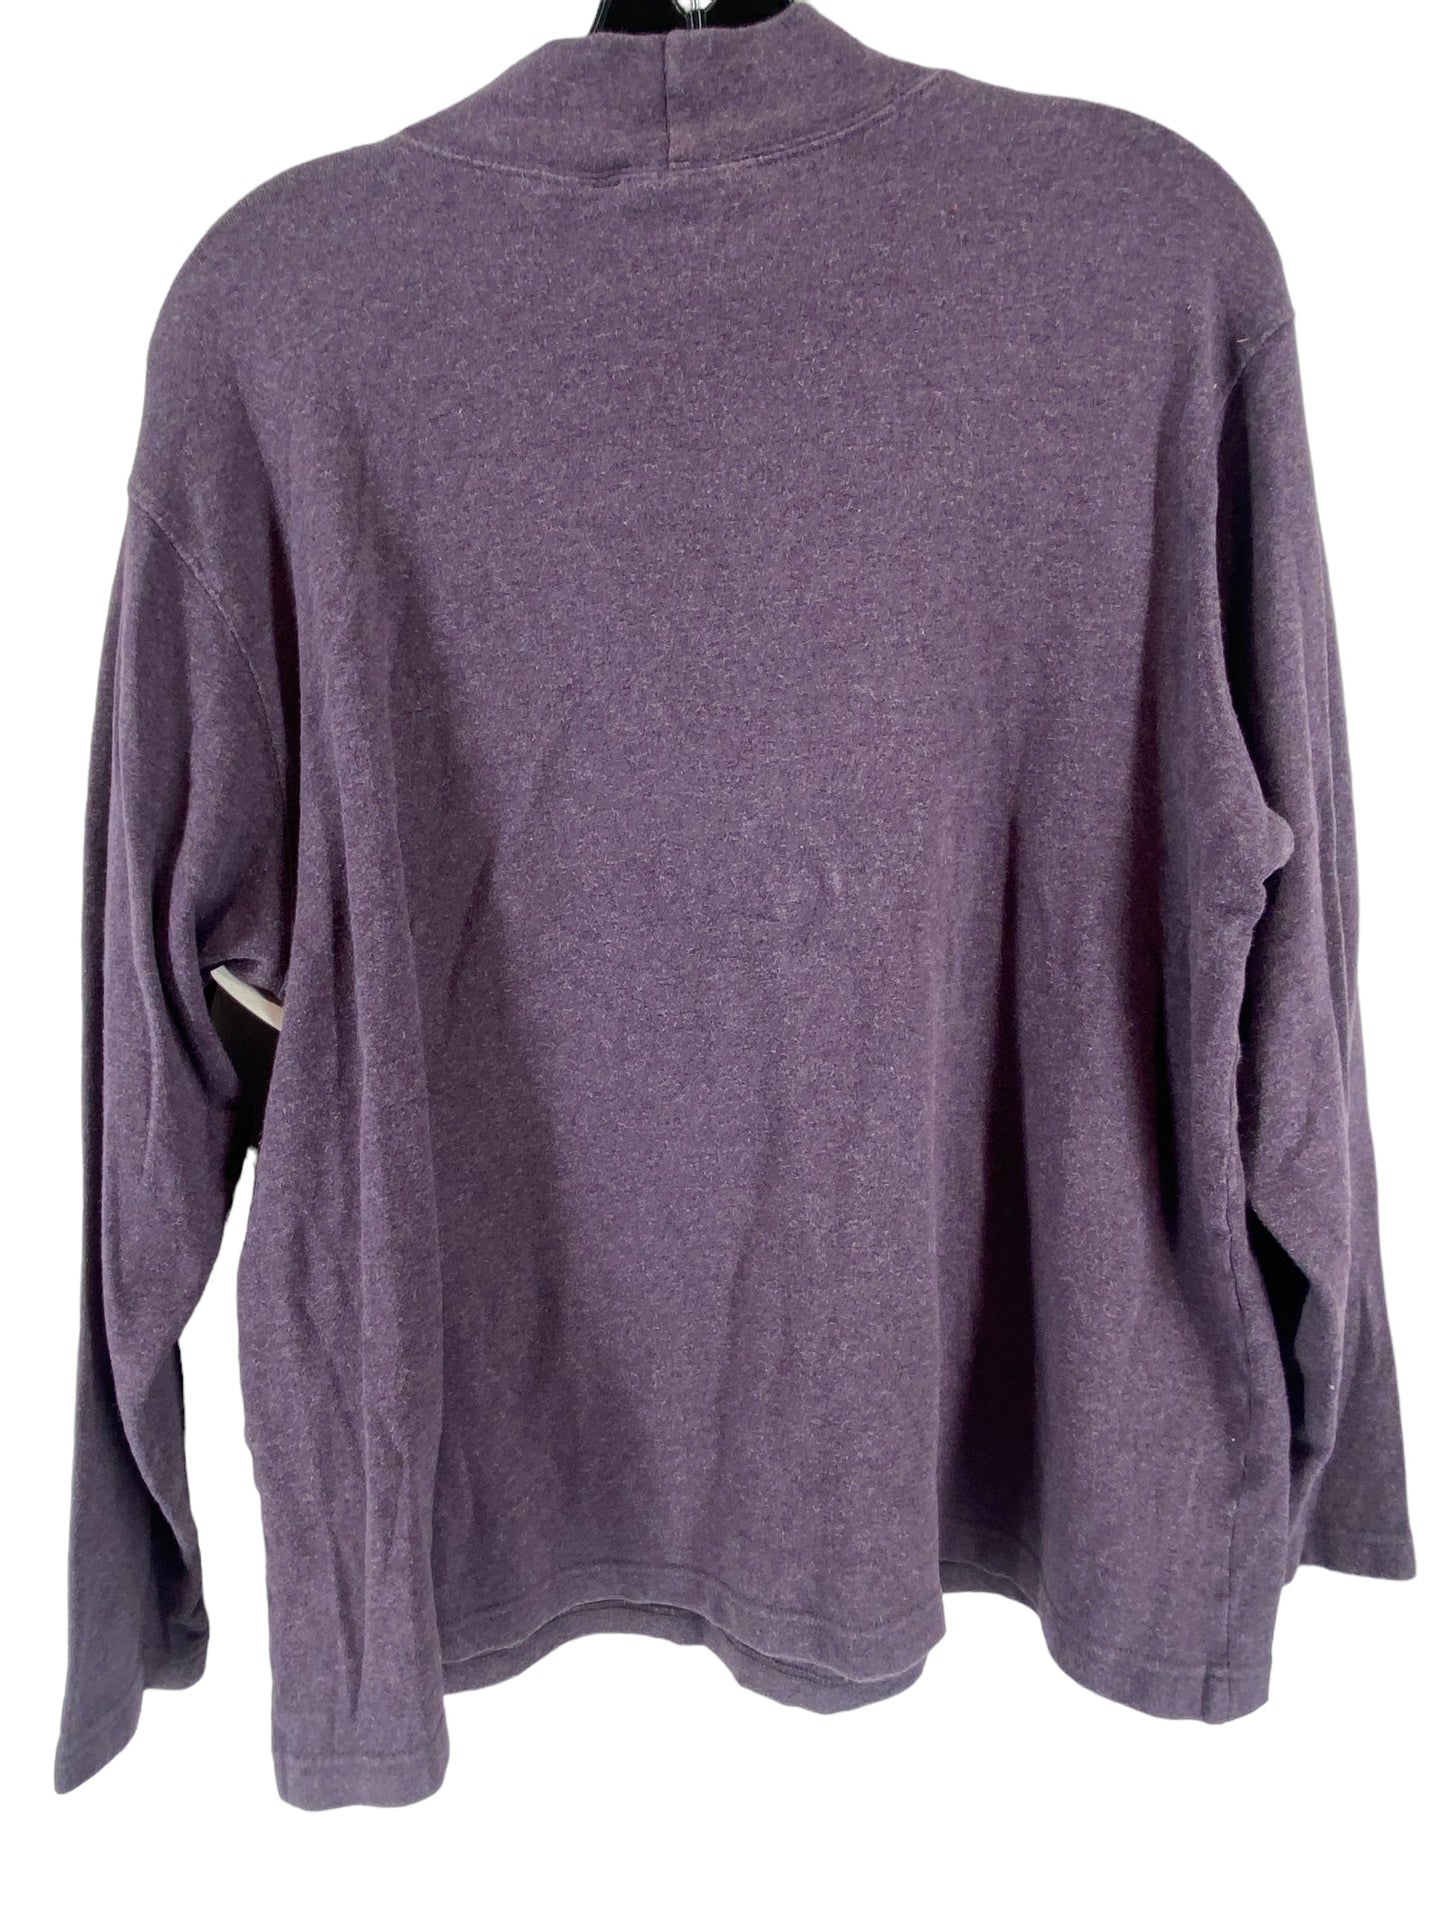 Top Long Sleeve By Croft And Barrow  Size: 1x